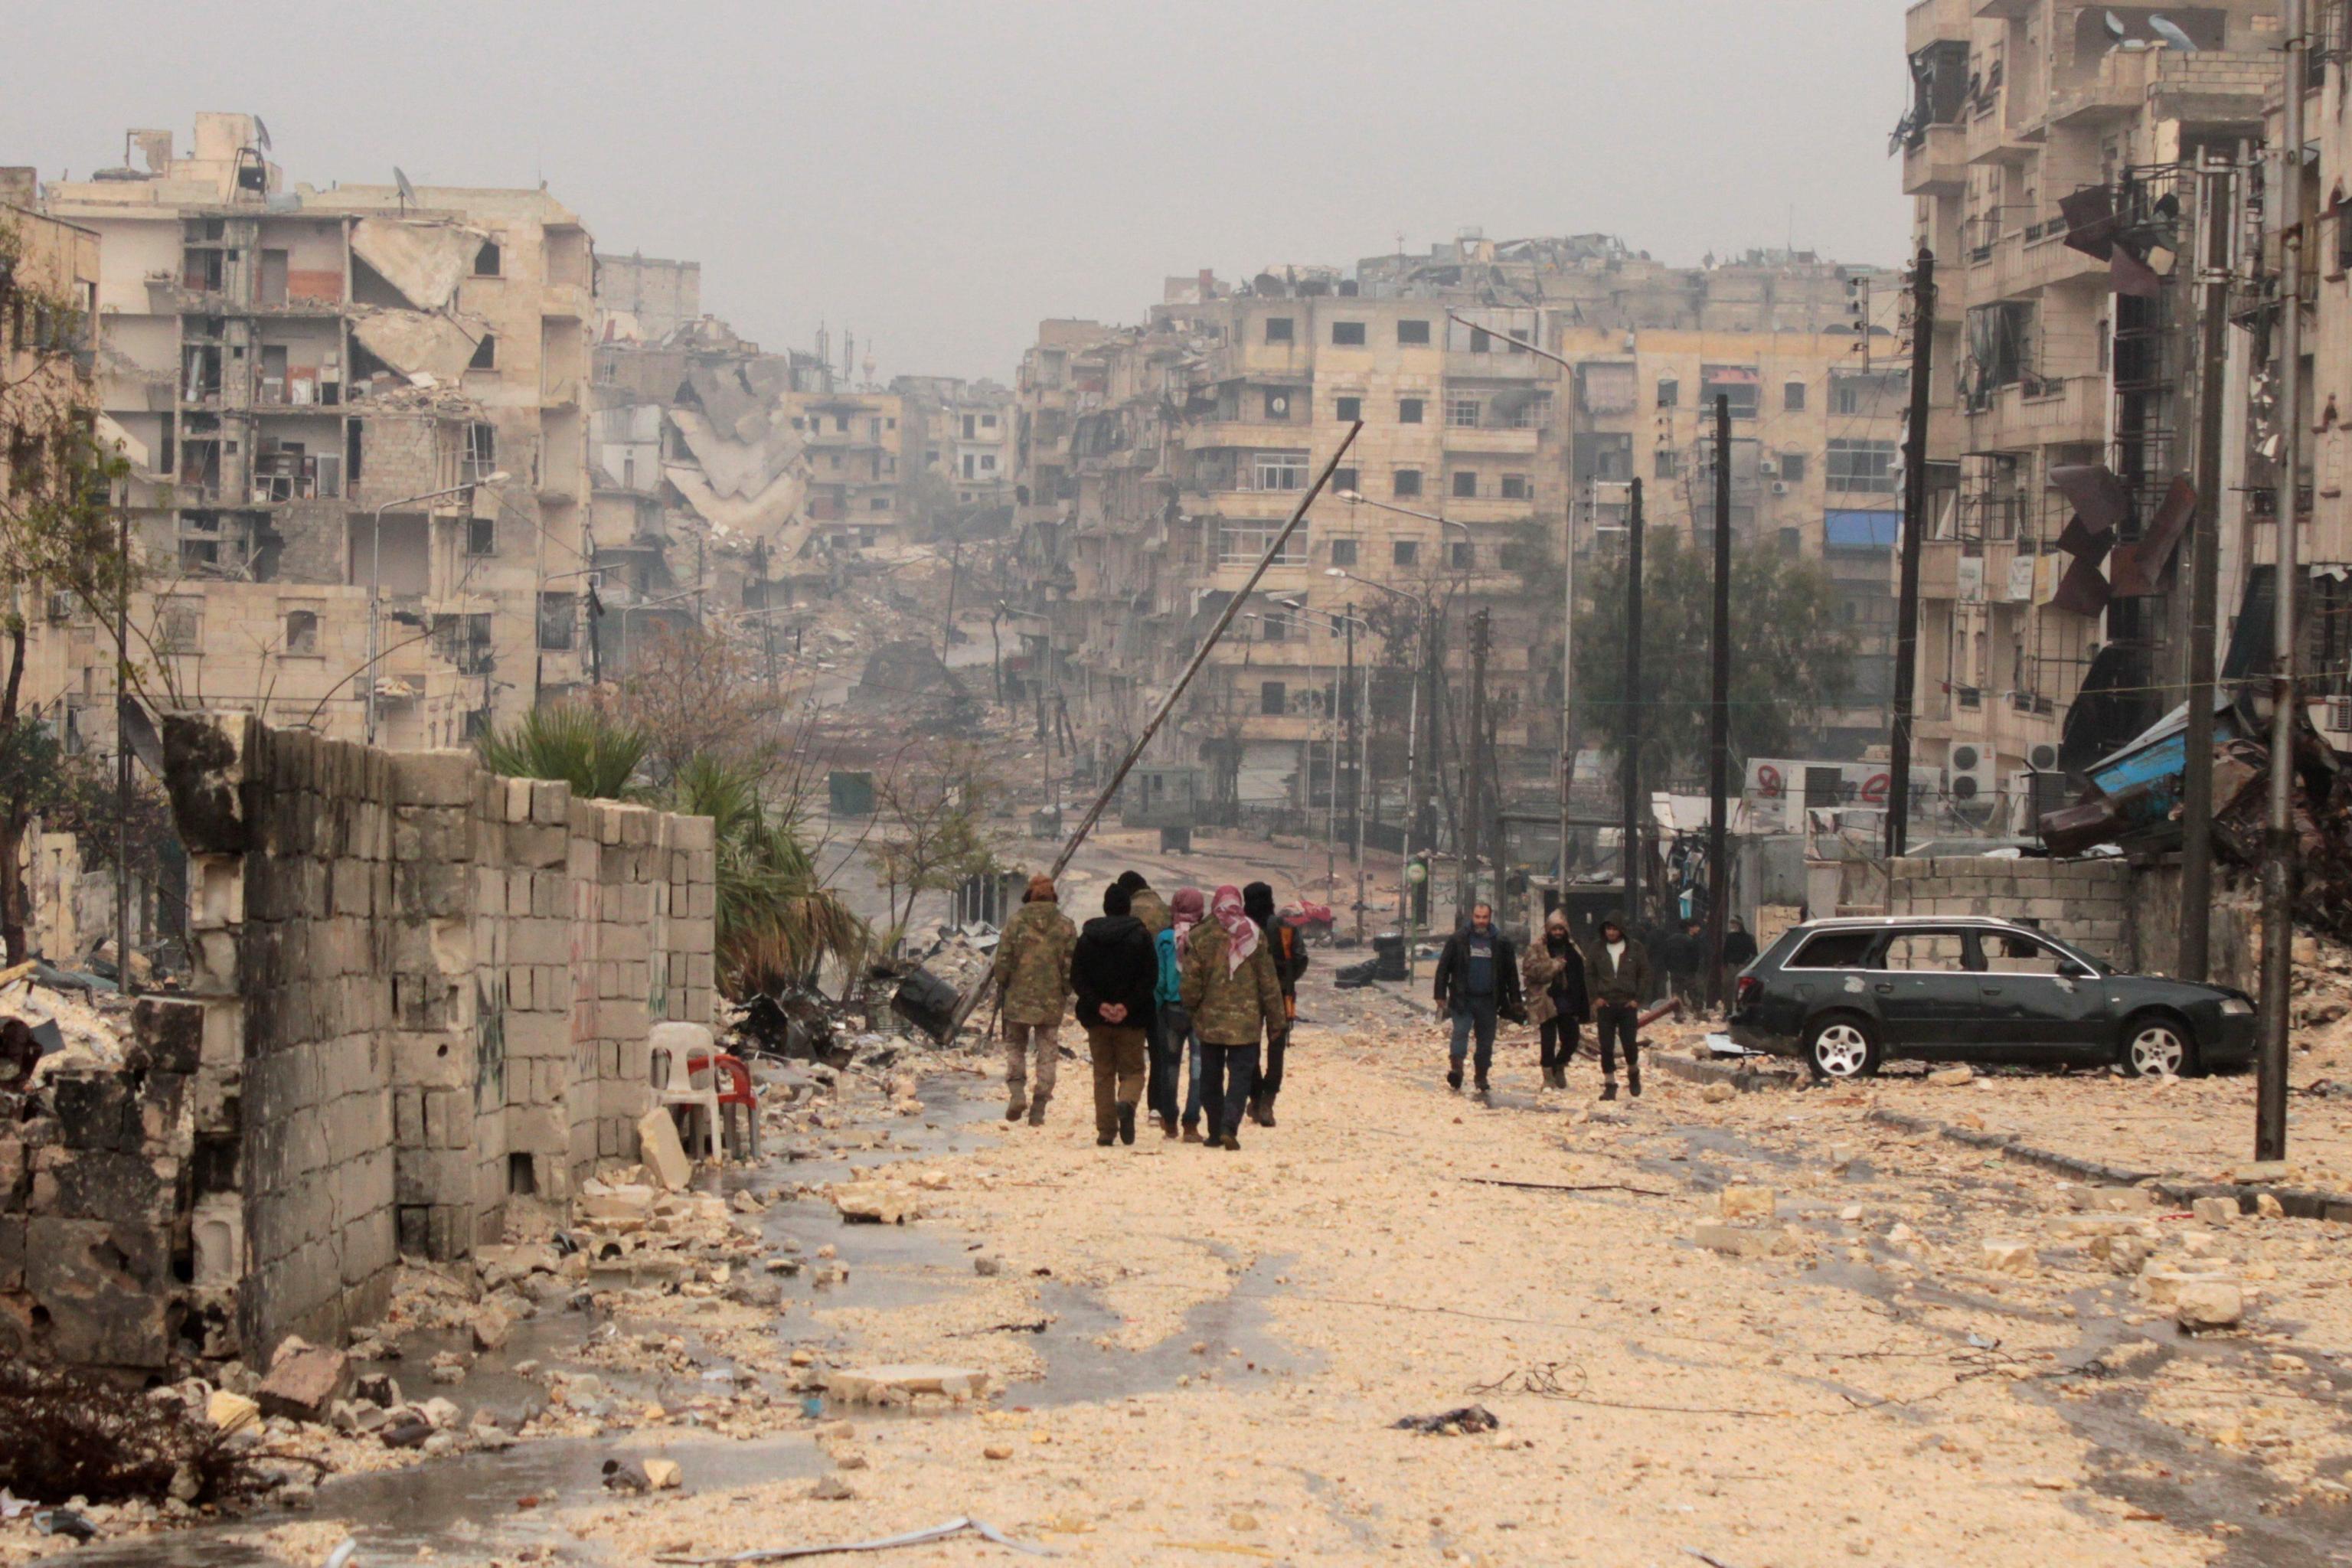 People walk at a damaged area one day after a ceasefire was announced, at al-Mashhad neighborhood in the rebel-held part of Aleppo, Syria, 14 December 2016. Syrian Observatory for Human Rights said fighting erupted around the final rebel-held area of Aleppo on 14 December as the scheduled ceasefire and mass evacuation of opposition fighters from the area stalled. ANSA/STRINGER